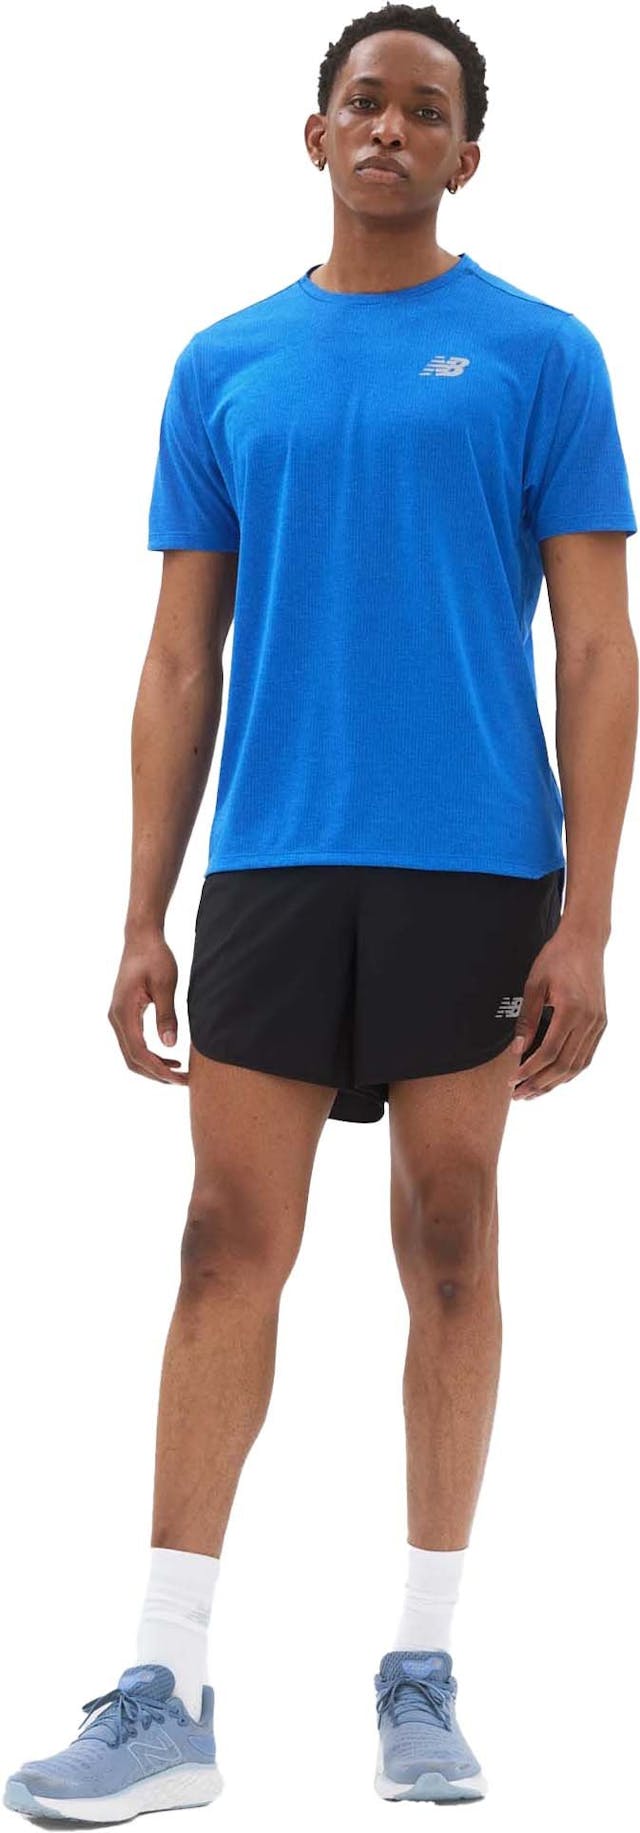 Product image for Impact Run 5 In Short - Men's